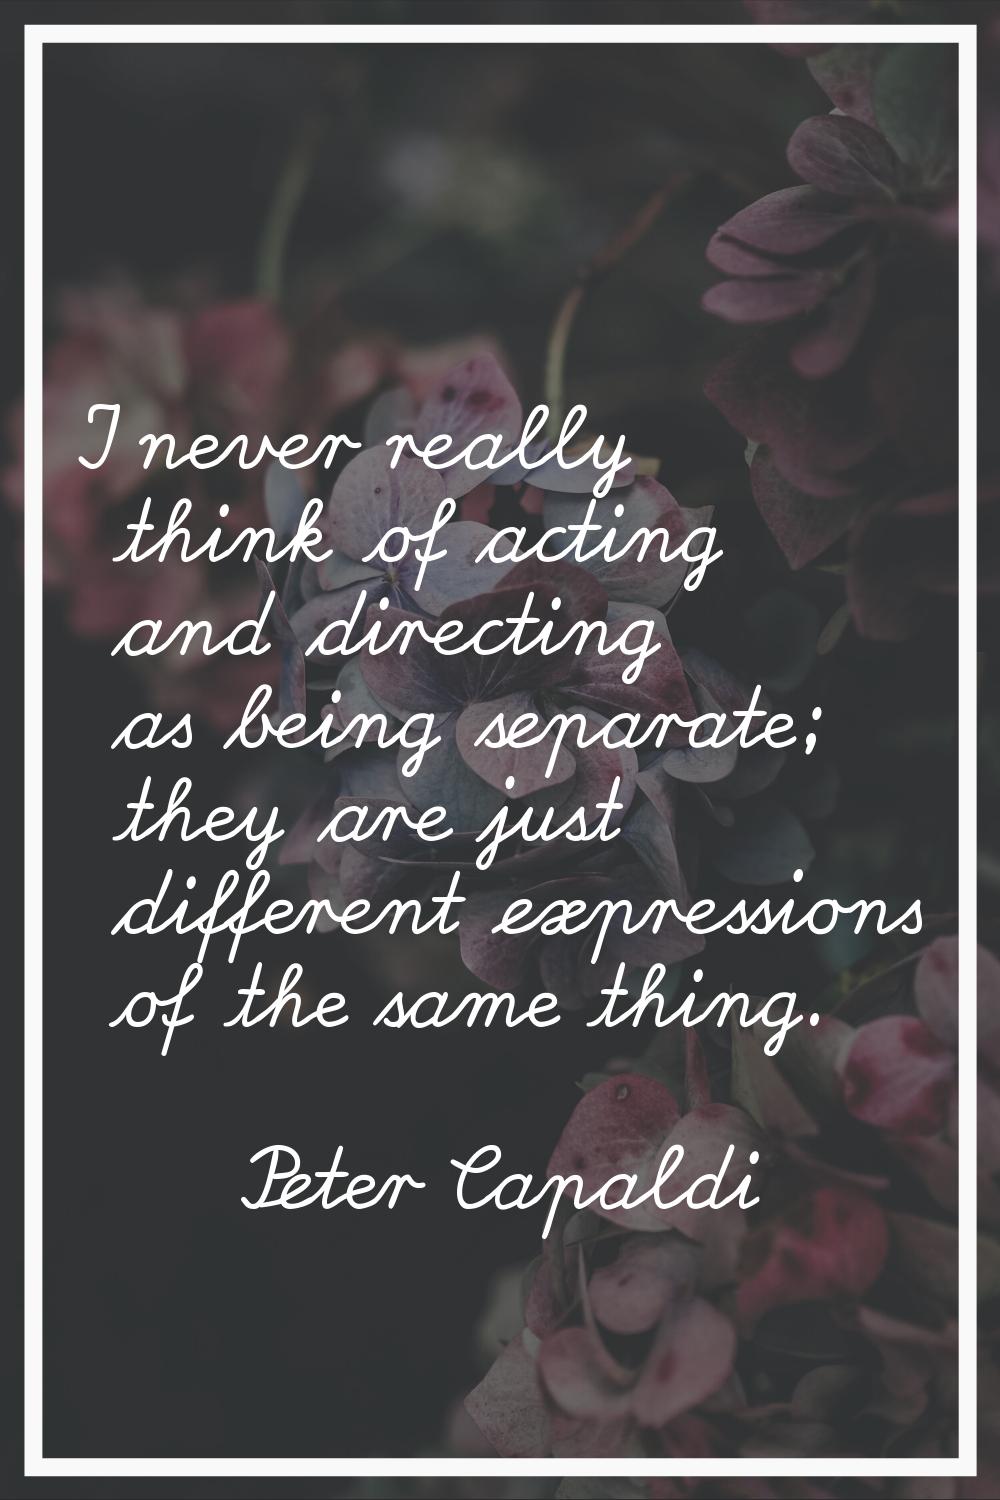 I never really think of acting and directing as being separate; they are just different expressions